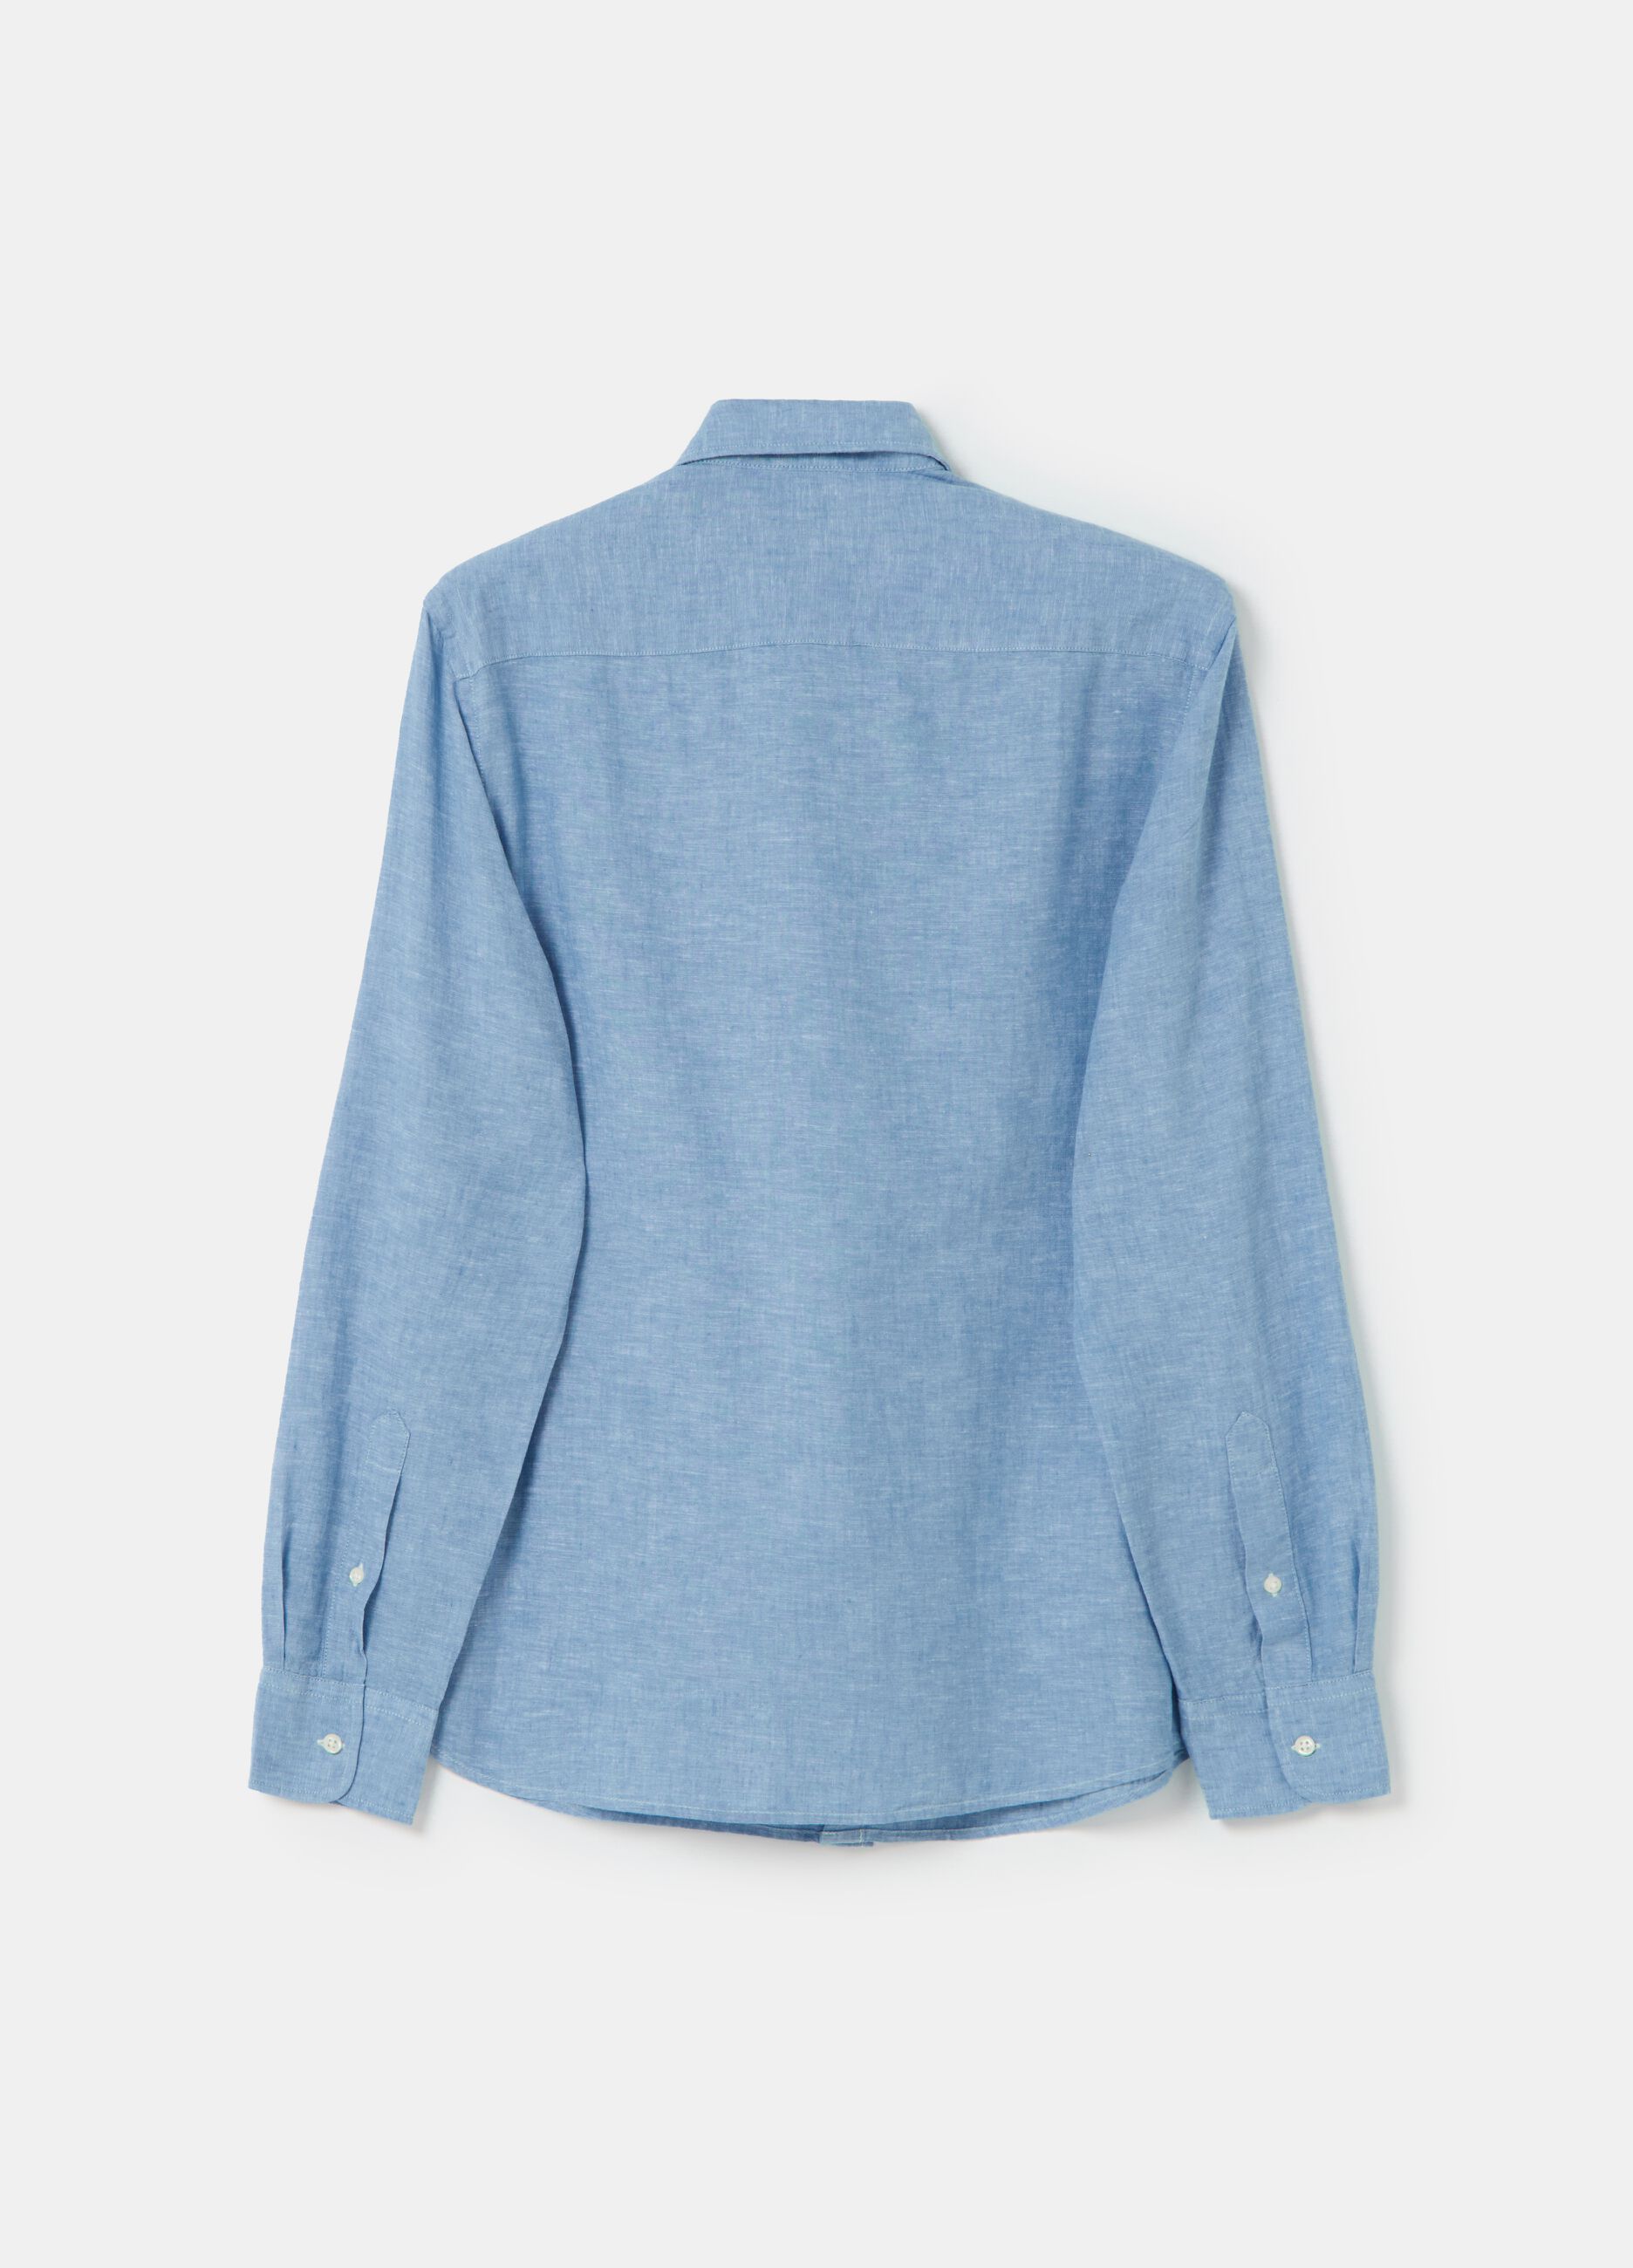 Shirt in chambray cotton and linen